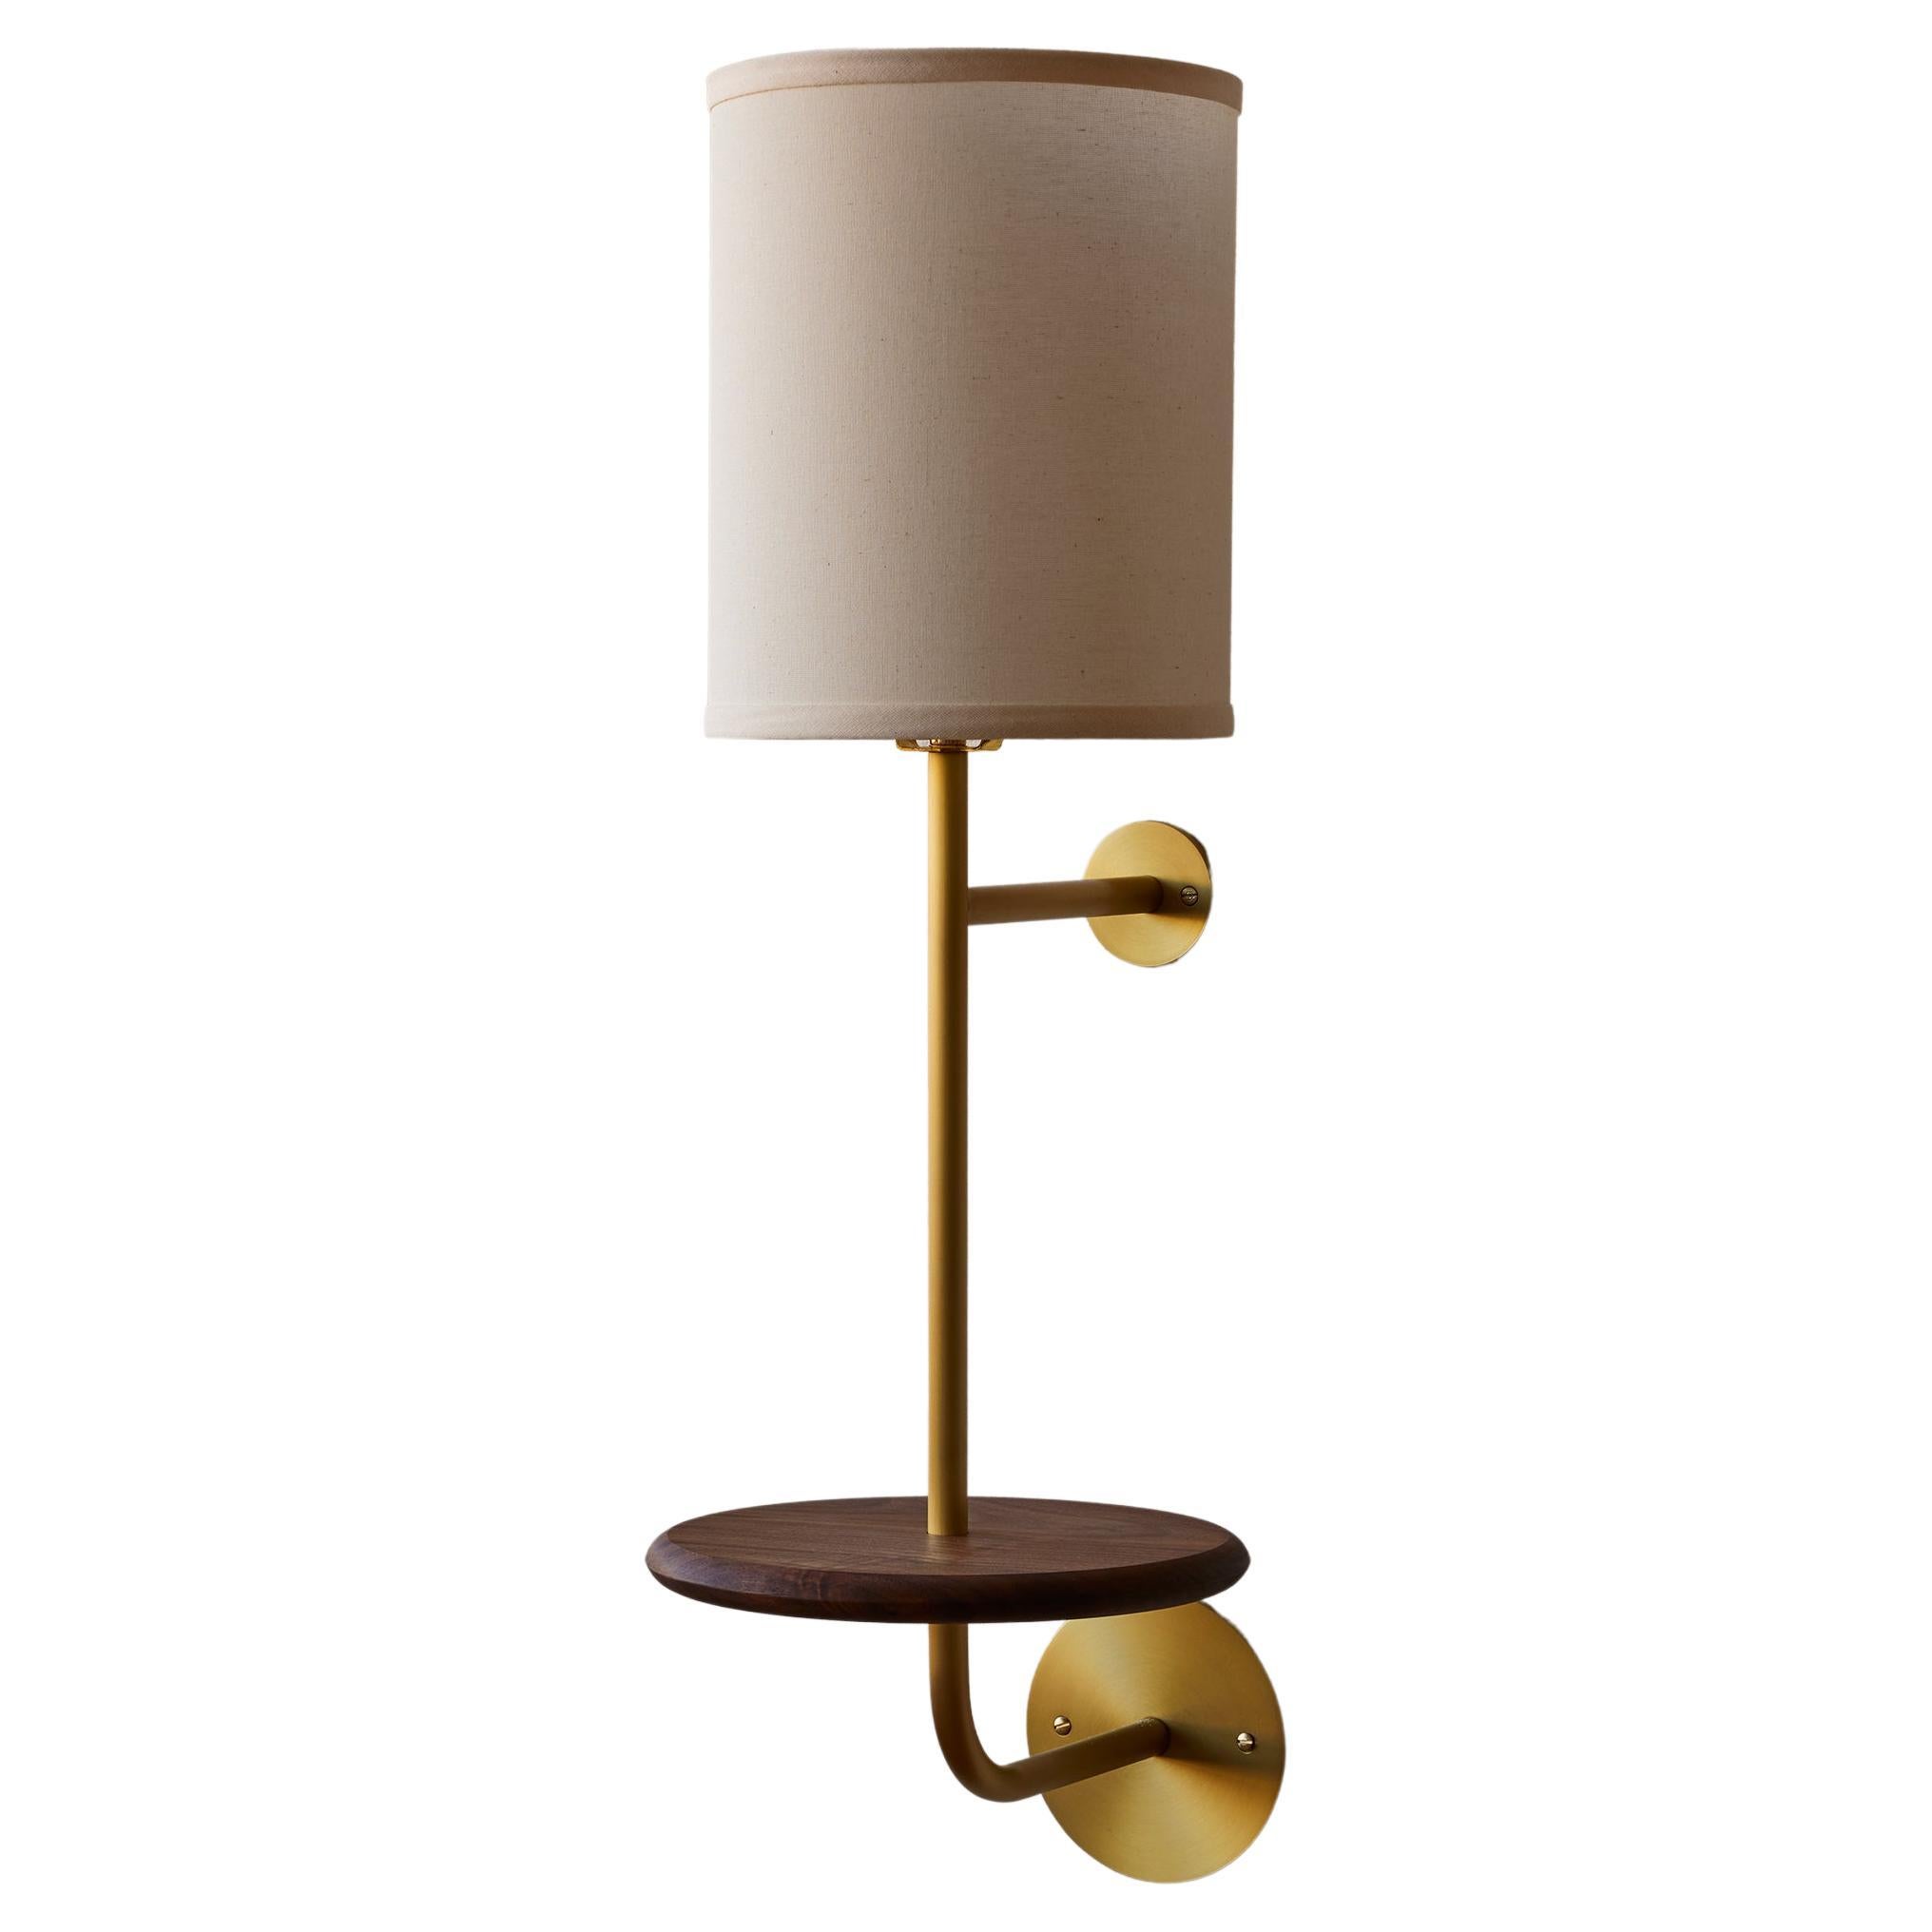 Satin Brass Wall Sconce with Black Walnut Shelf Hardwired Ivory Linen Shade For Sale